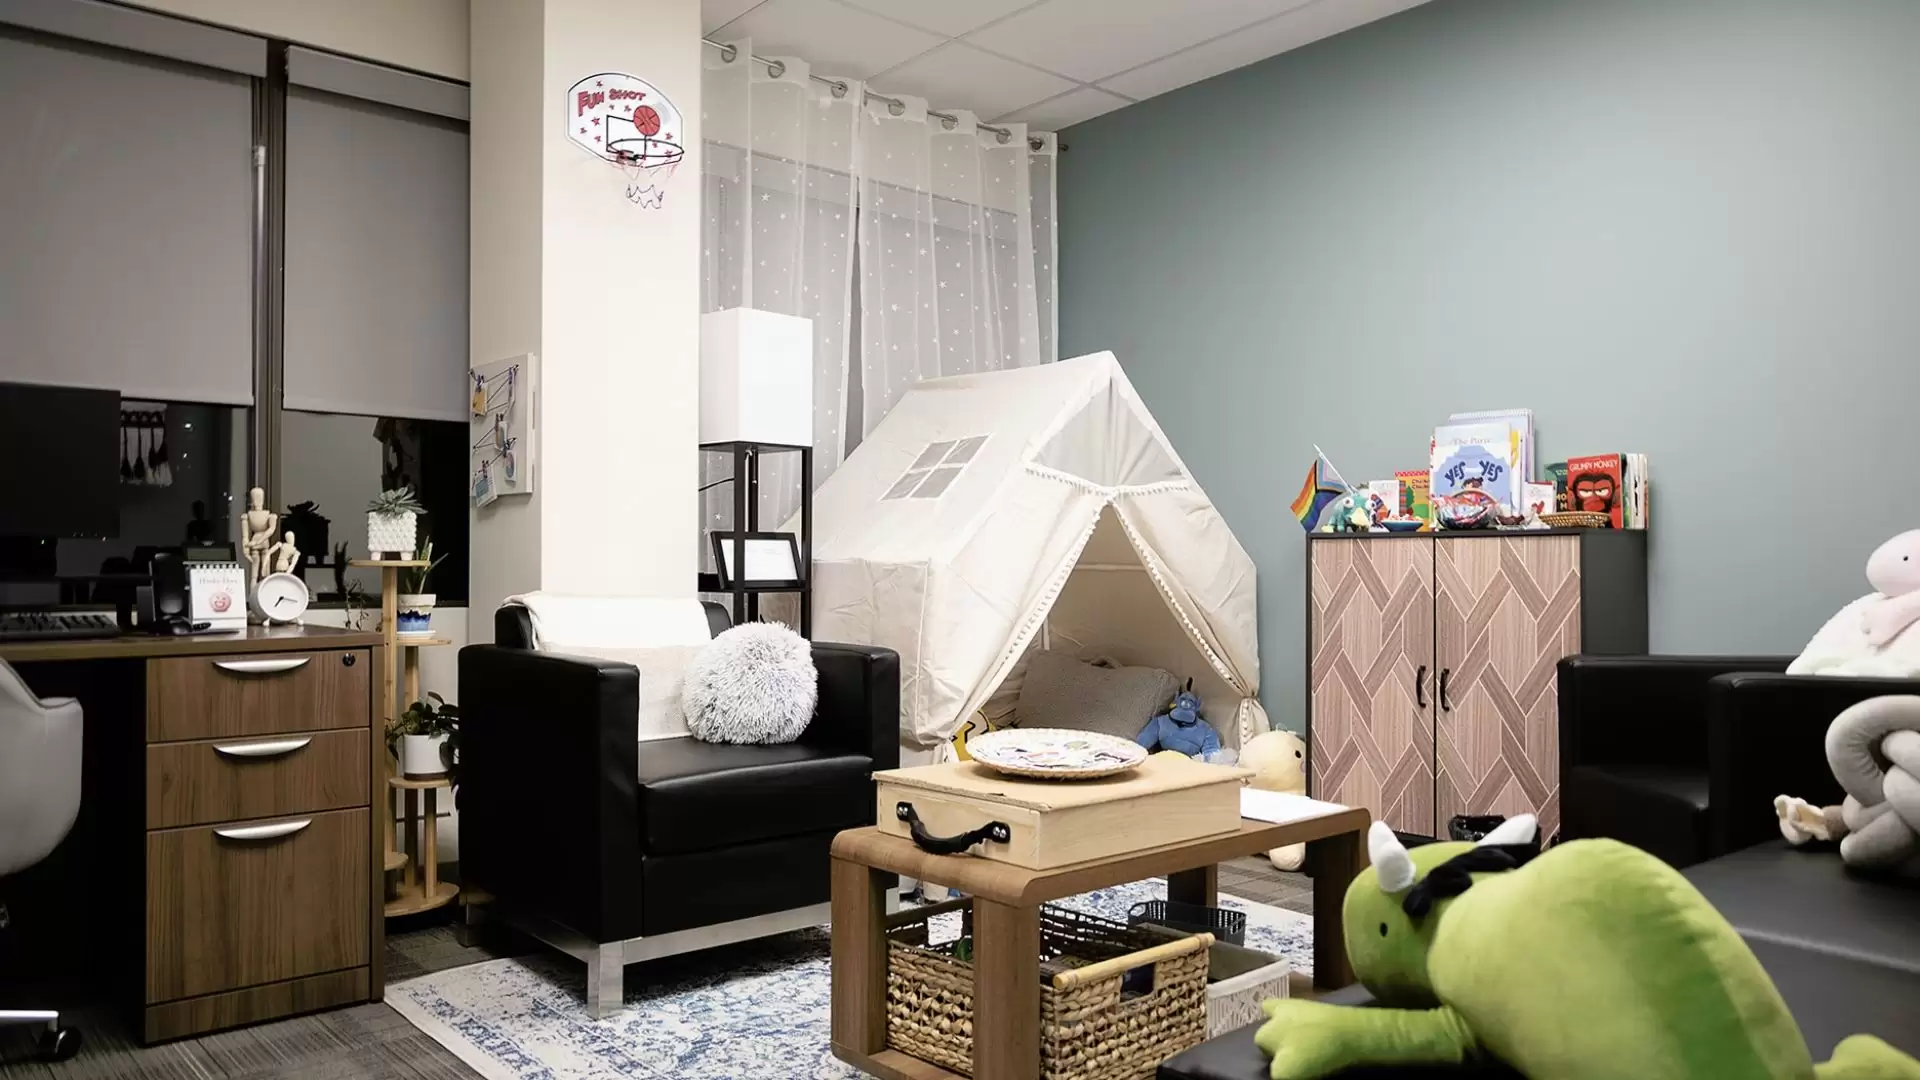 Youth counsellor office with a small cabin style tent filled with plus toys and pillows. A cabinet with children and youth books displayed on the top sits against the wall with a small table and chair in the middle of the office. A desk and computer are against the wall with windows with the blinds pulled halfway down.